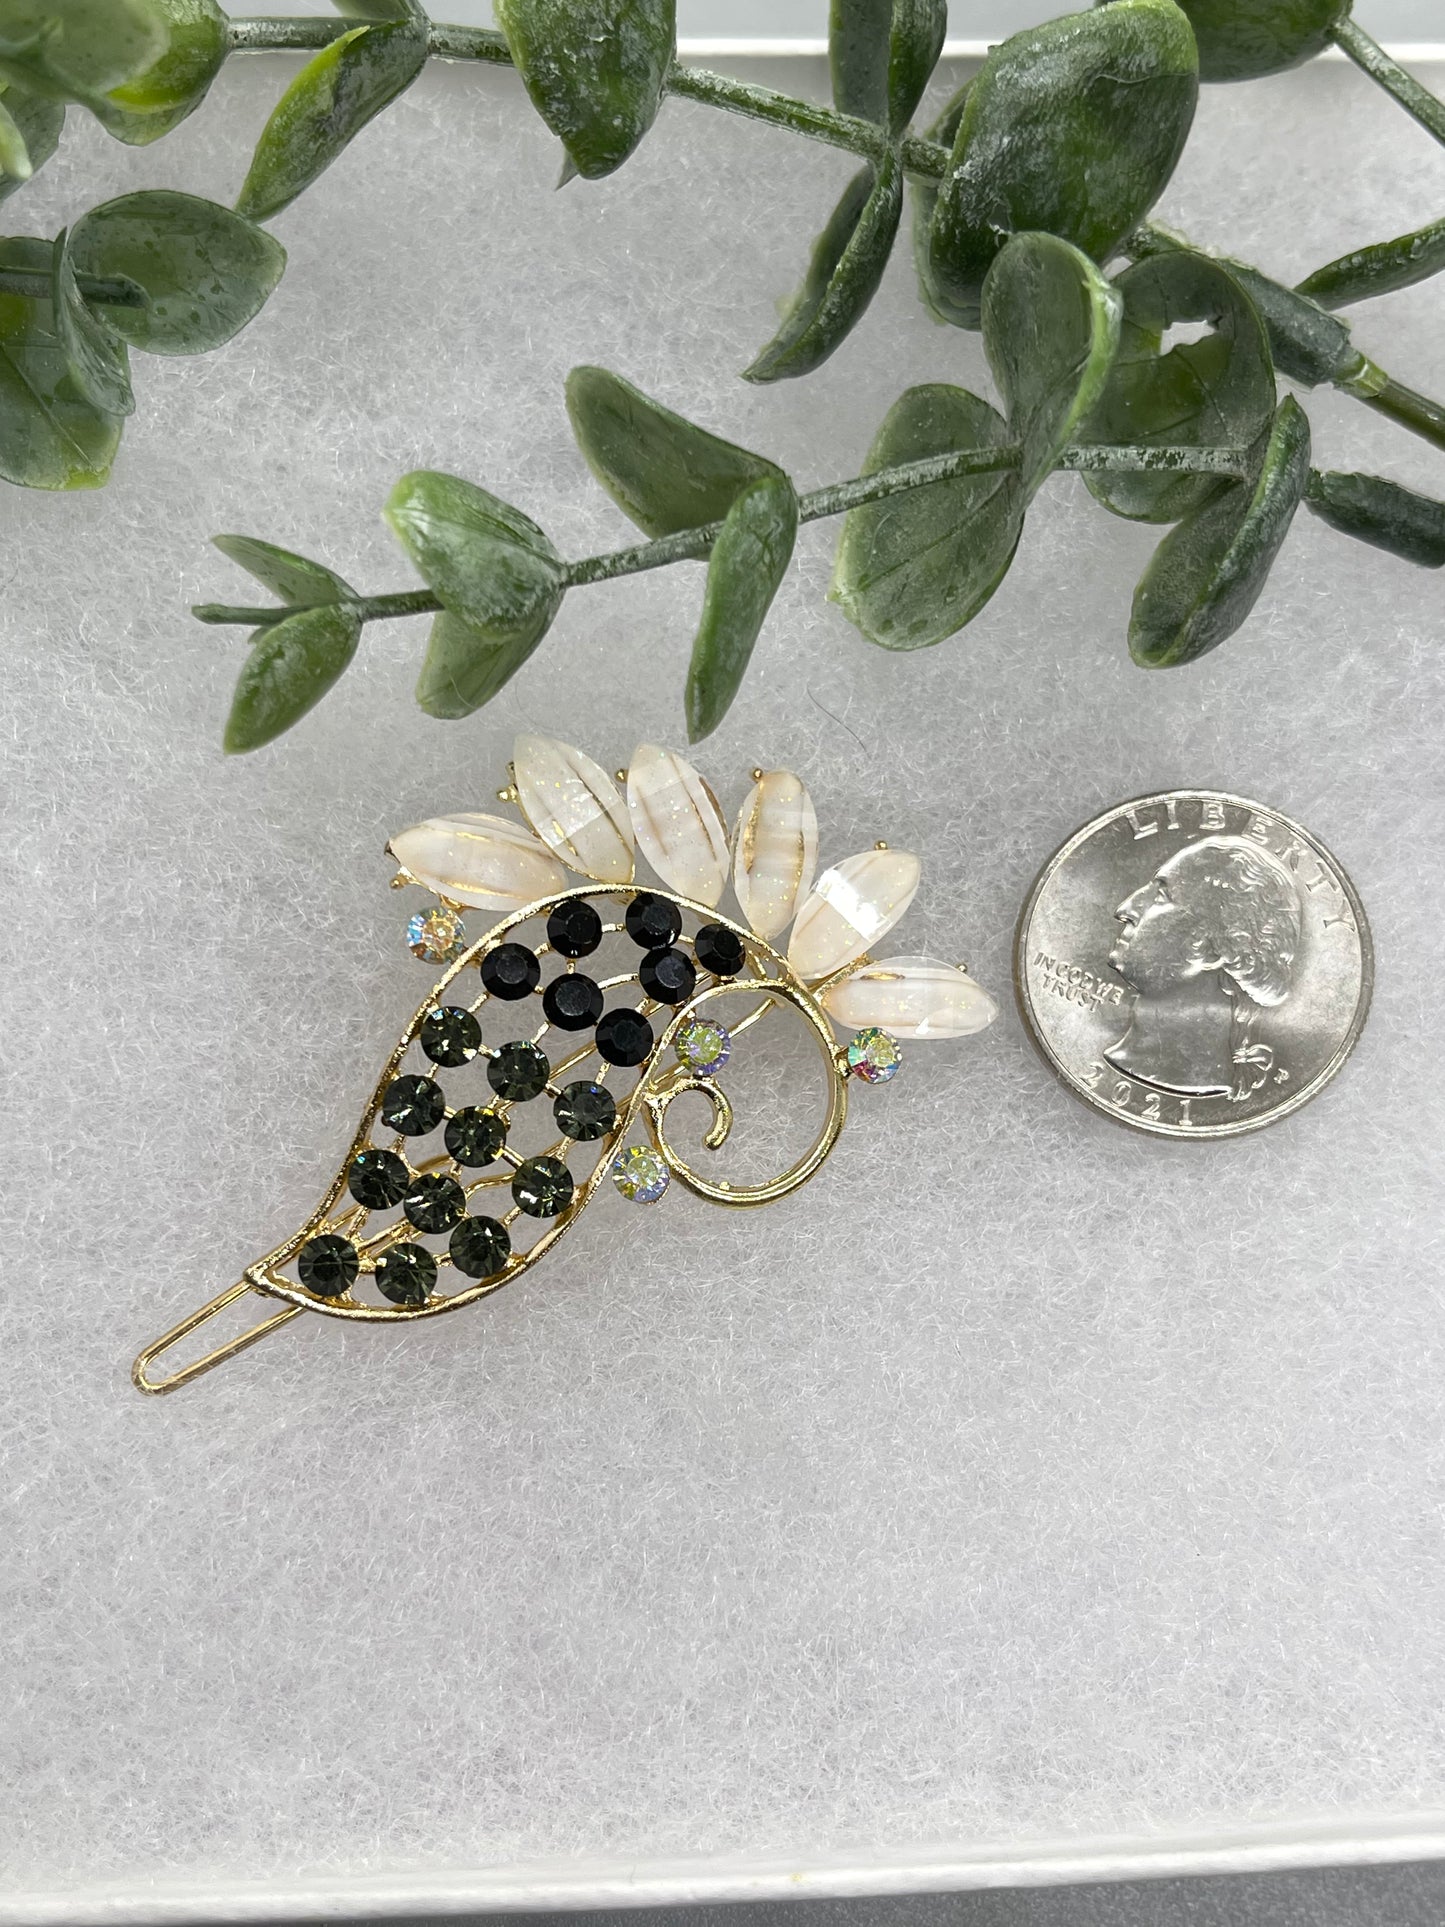 White with black  Crystal Rhinestone peacock hair clip approximately 3.0”Metal gold tone formal hair accessory gift wedding bridal engagement